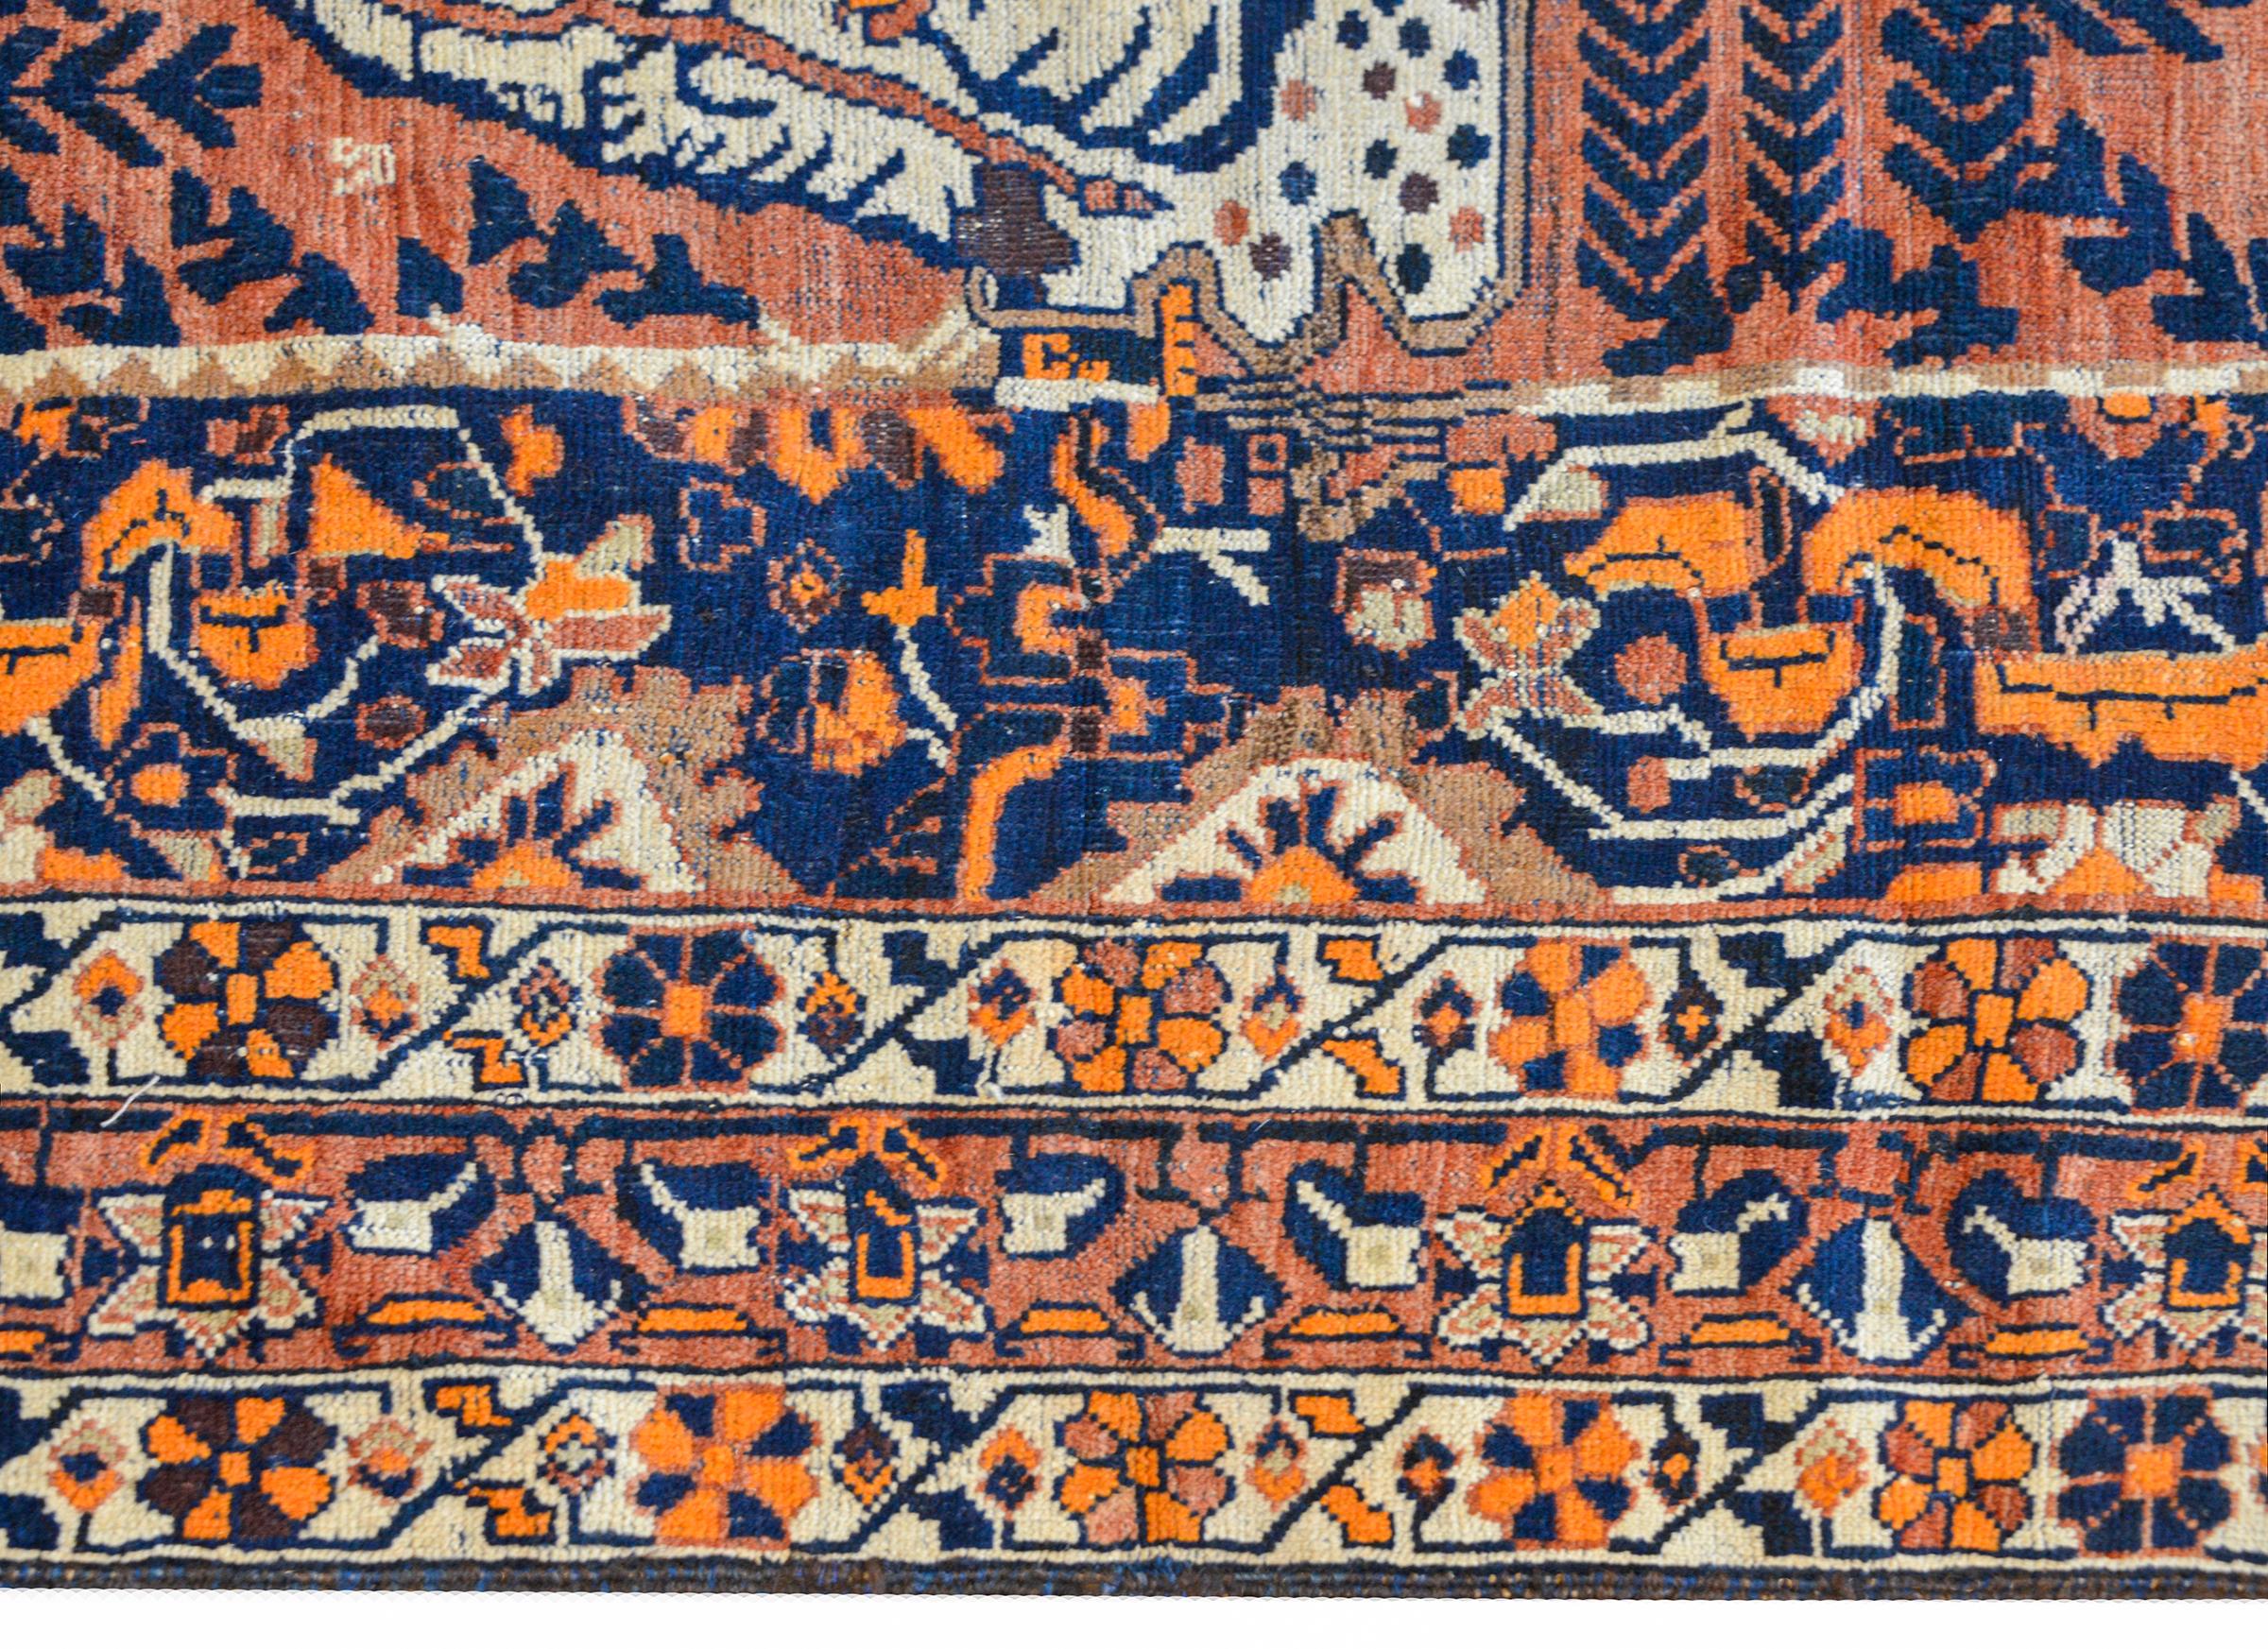 Wool Early 20th Century Pictorial Qashgai Rug For Sale